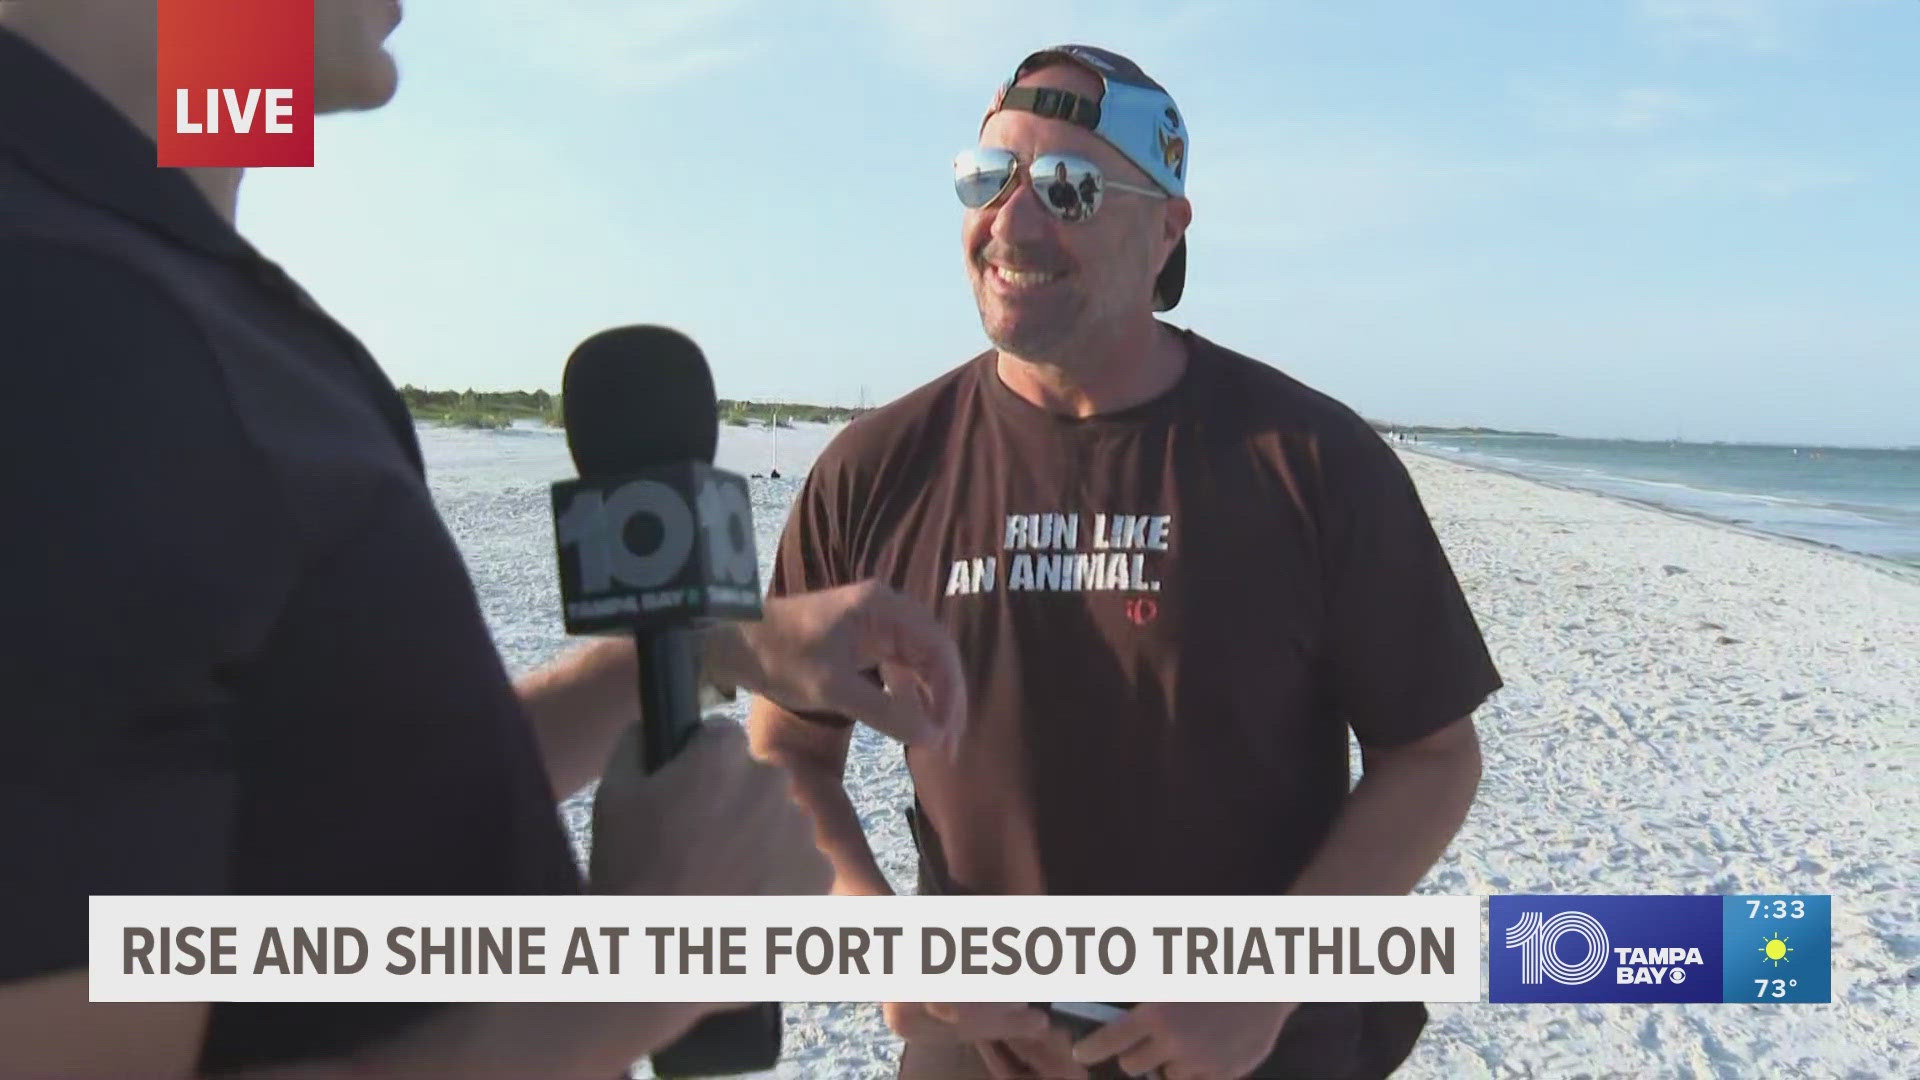 Swimmers, bikers and runners are all taking part in the Fort DeSoto triathlon.